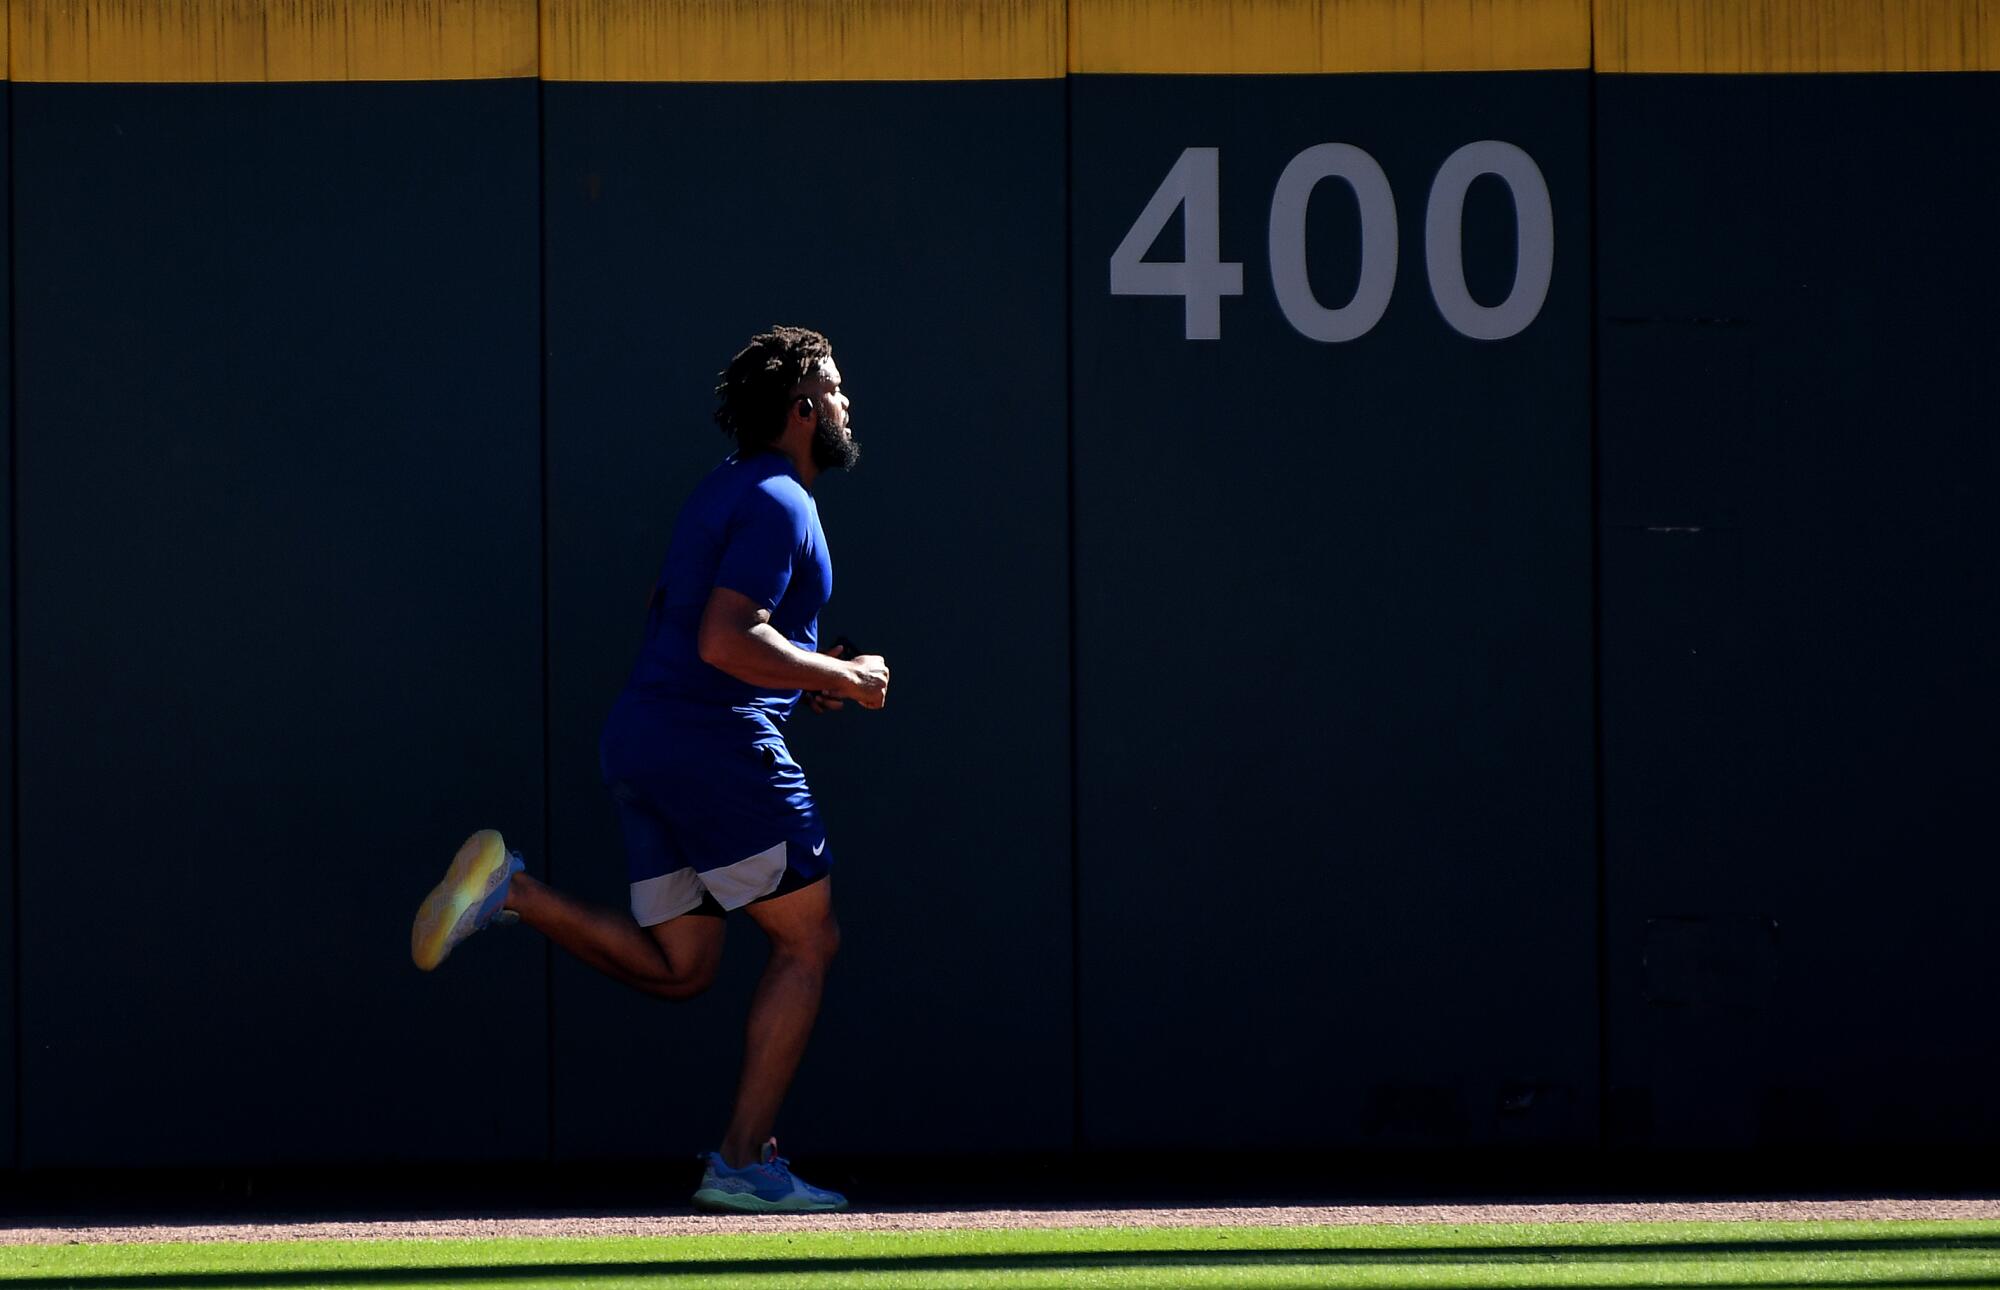 The Dodgers' Kenley Jansen runs in the outfield to warm up before Game 1.